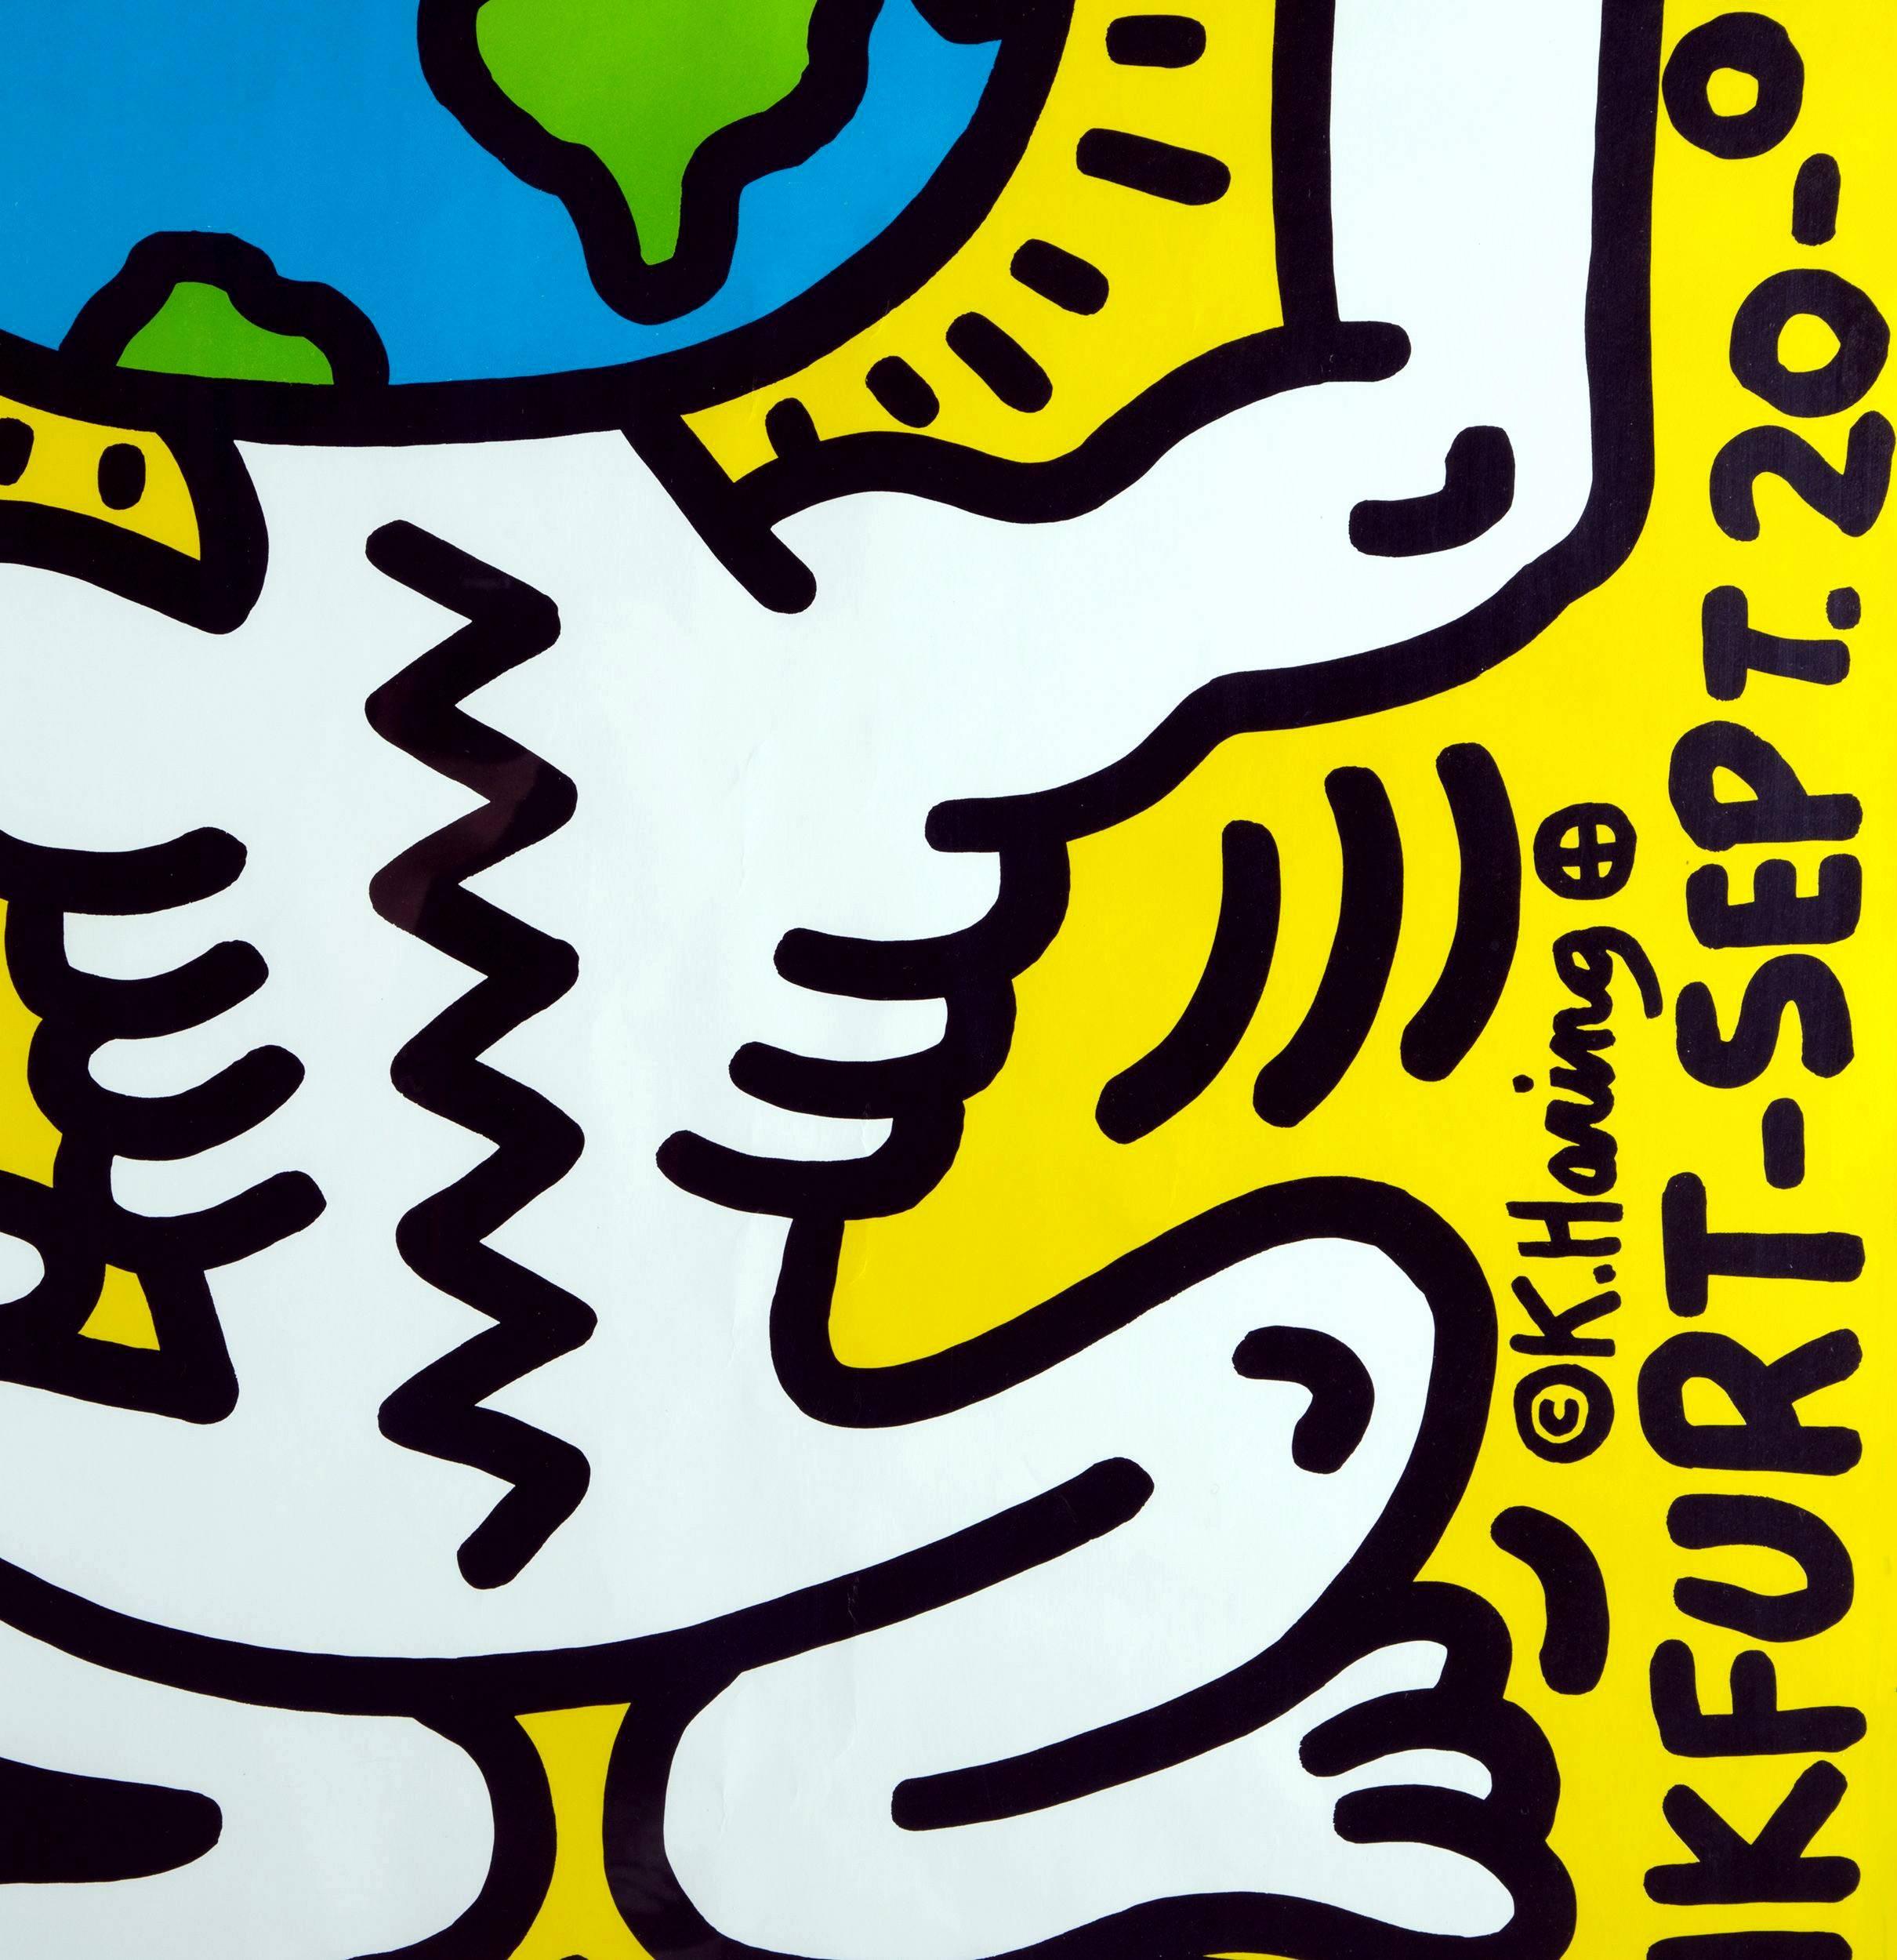 Keith Haring, Theater der Welt Lithograph, Frankfurt, Germany 1985 
Original 1st printing produced during Haring's lifetime. Bold, stand-out colors that make for brilliant Haring wall art within reach. 

Silkscreen in black, yellow, blue and green